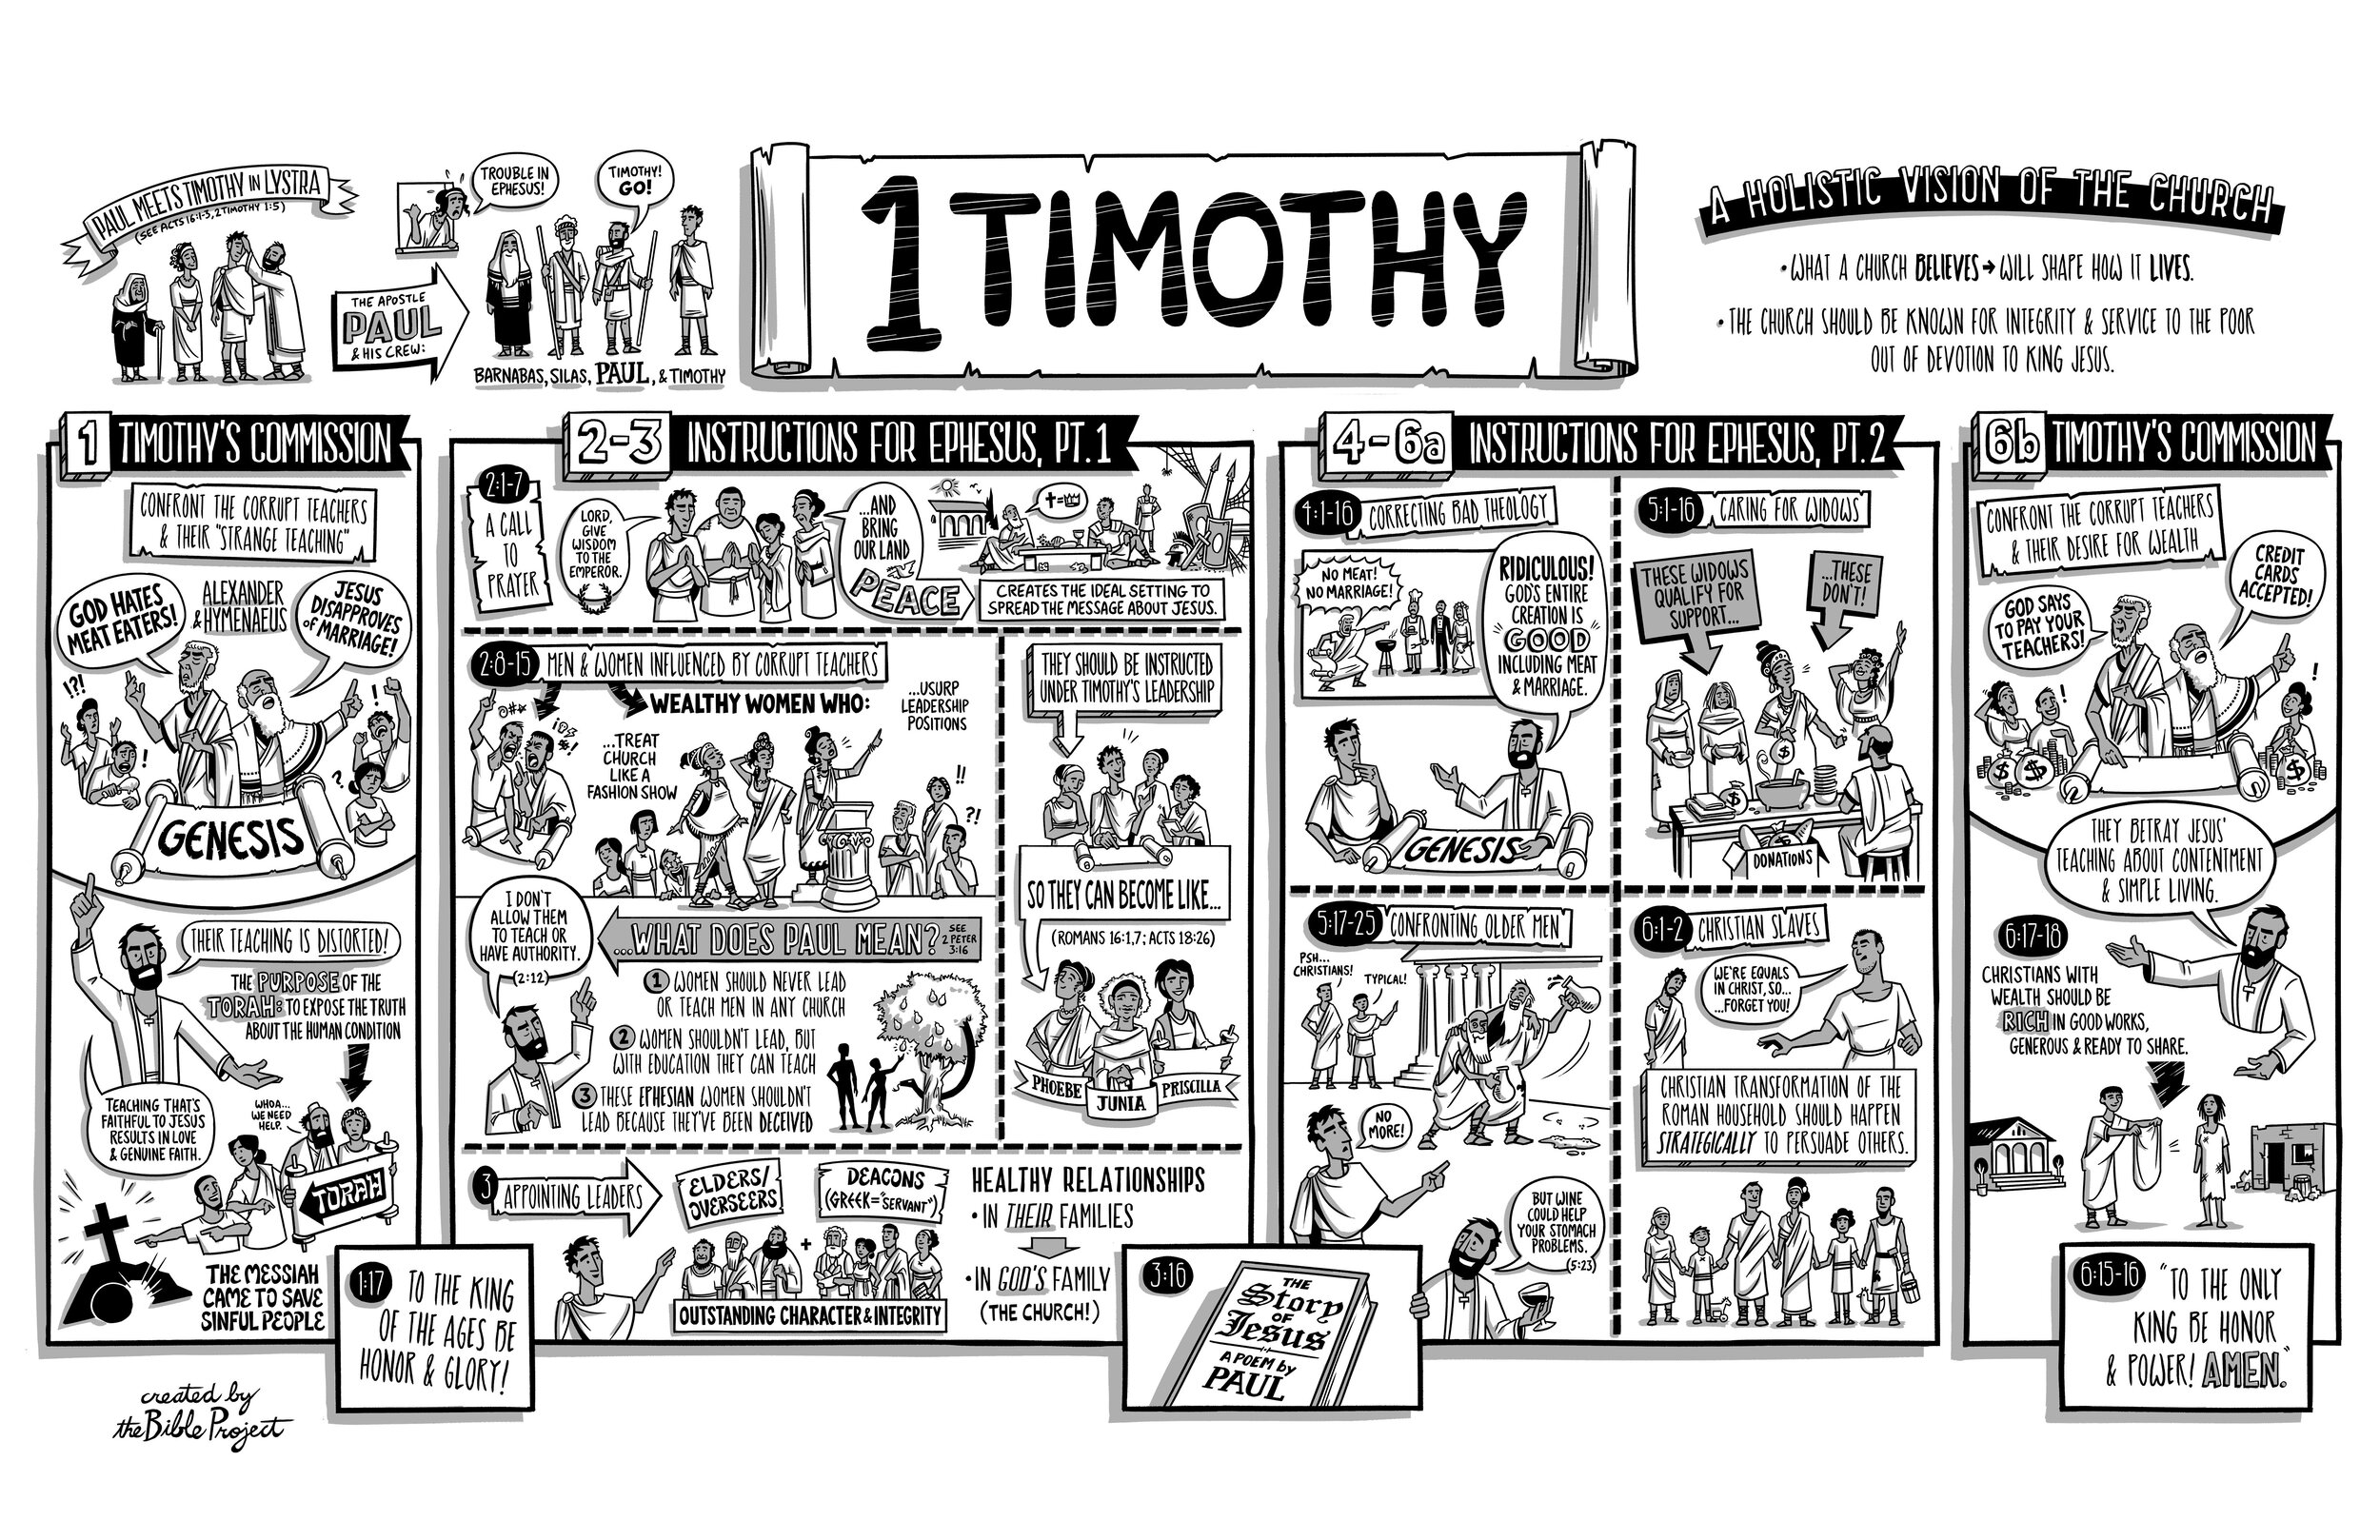 BibleProject: 1 Timothy (Video)